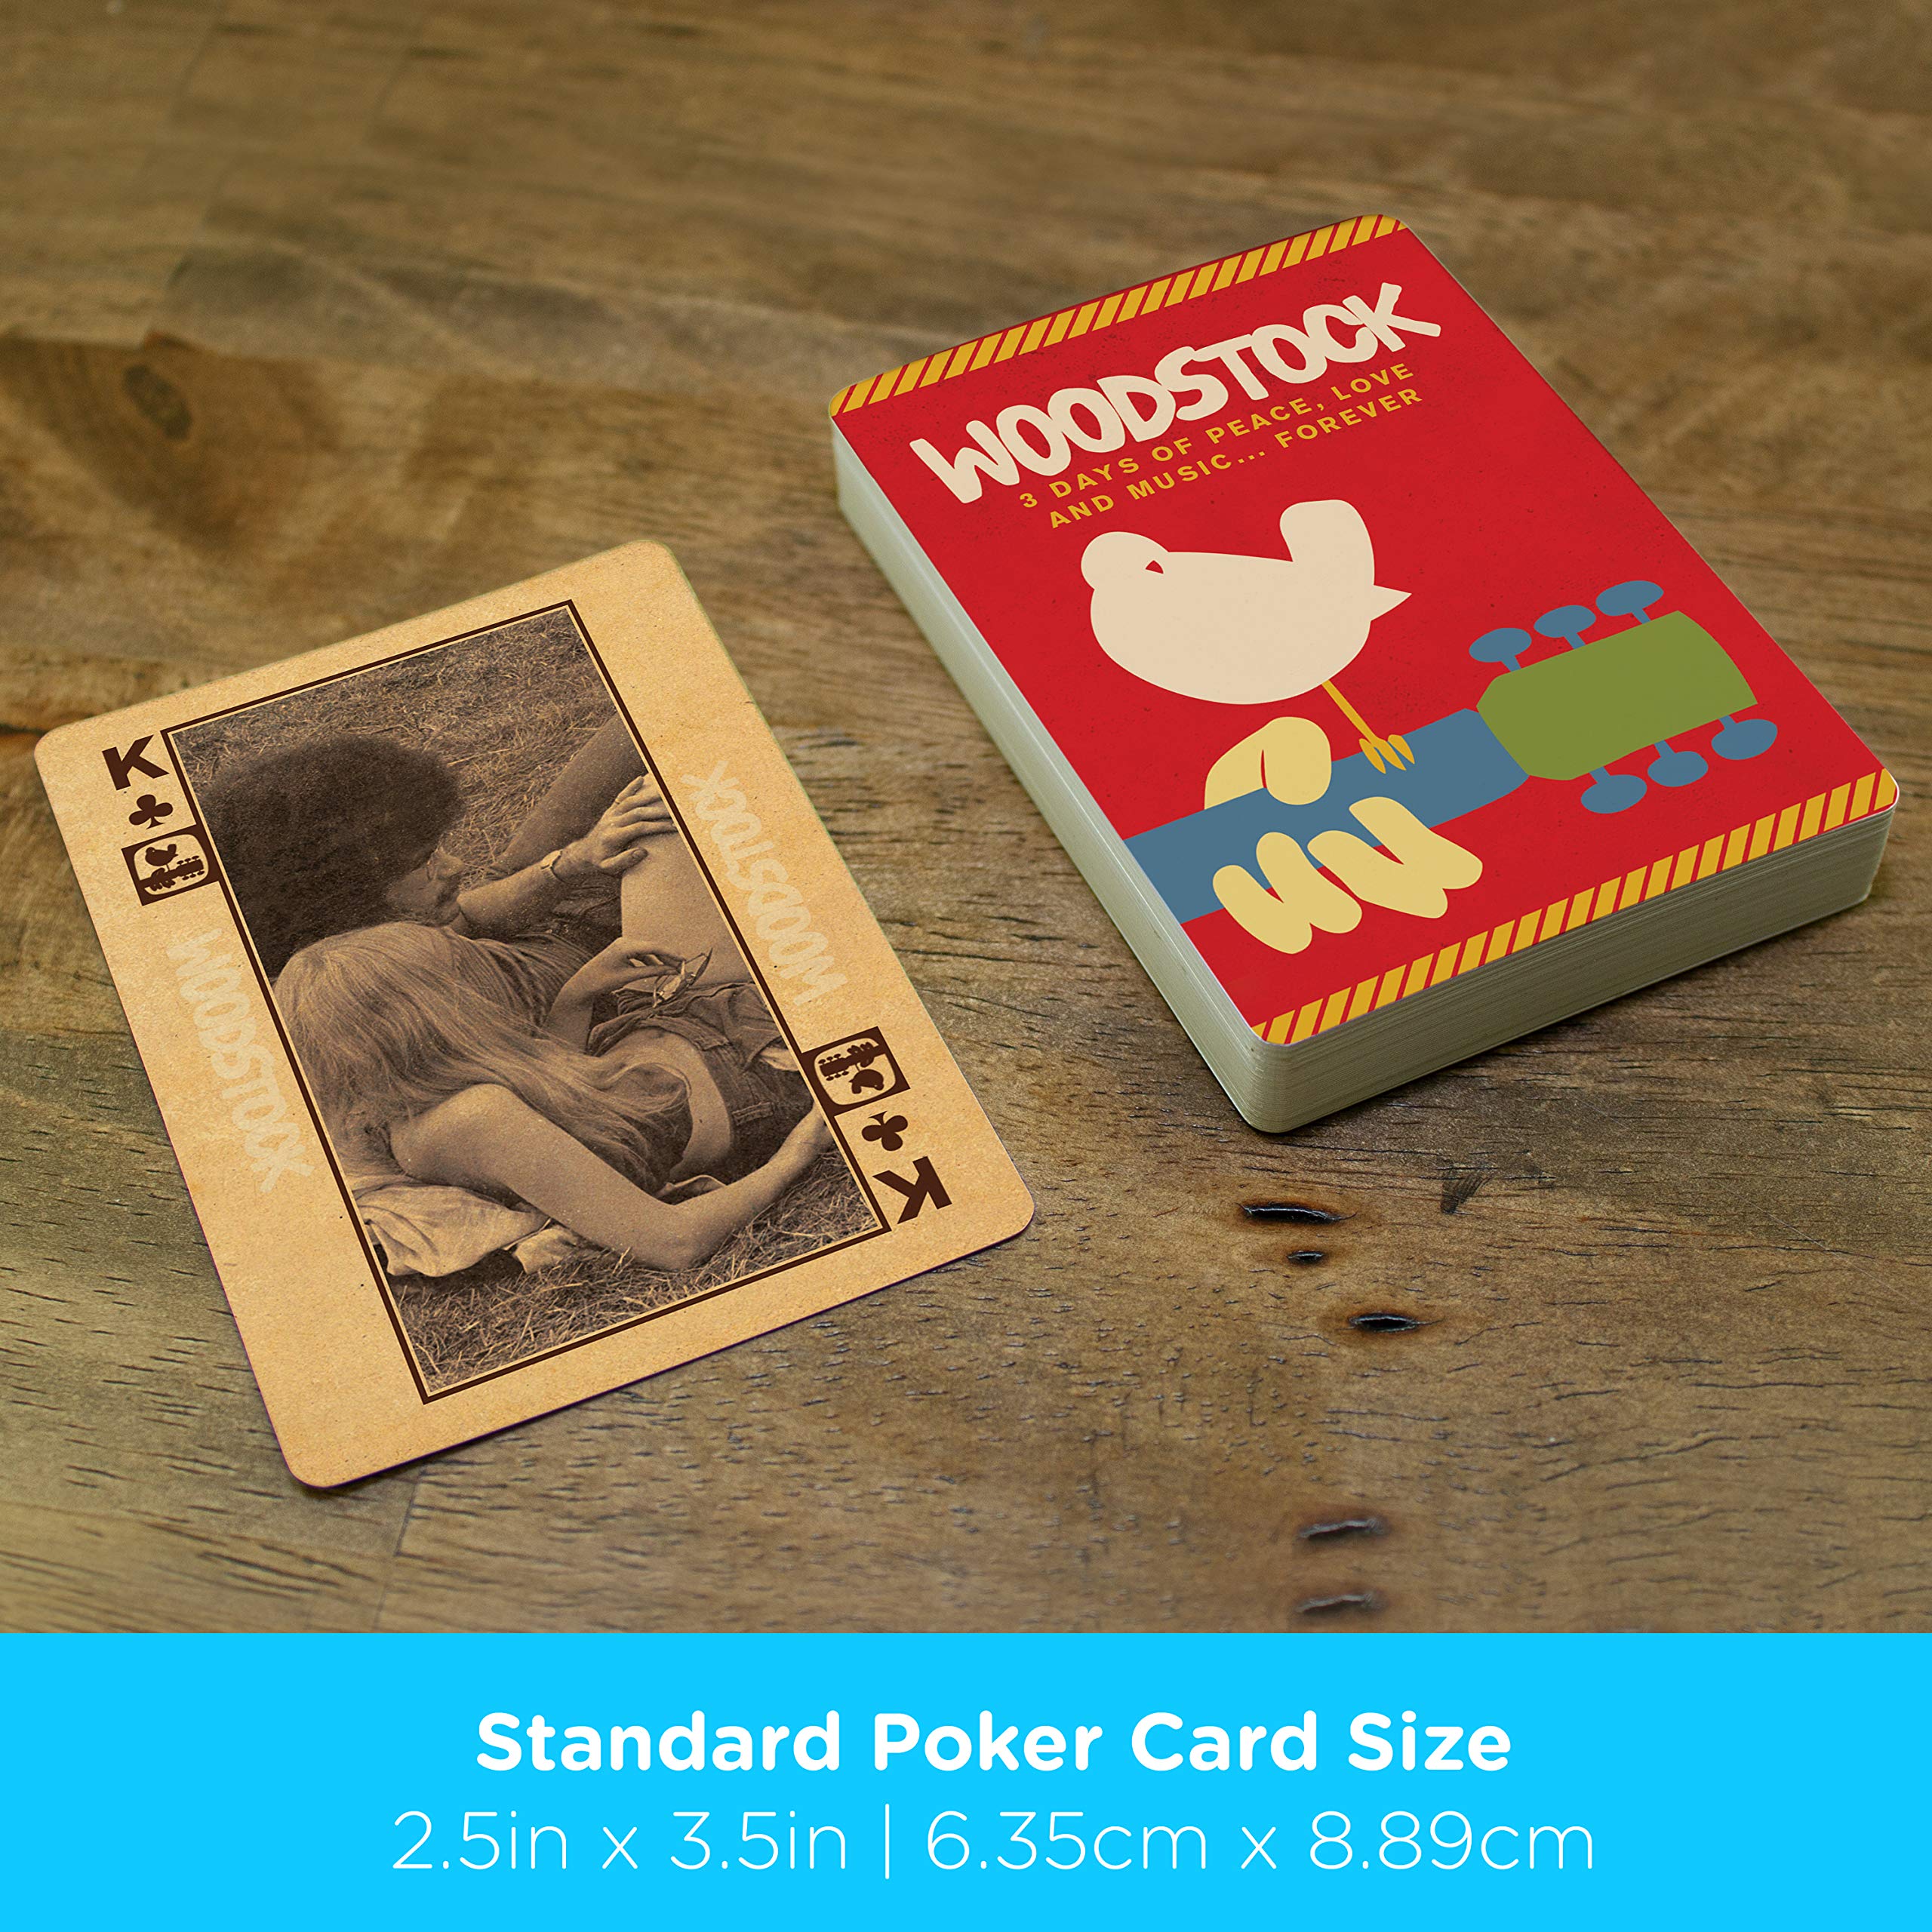 AQUARIUS Woodstock Playing Cards - Woodstock Themed Deck of Cards for Your Favorite Card Games - Officially Licensed Woodstock Merchandise & Collectible Gift